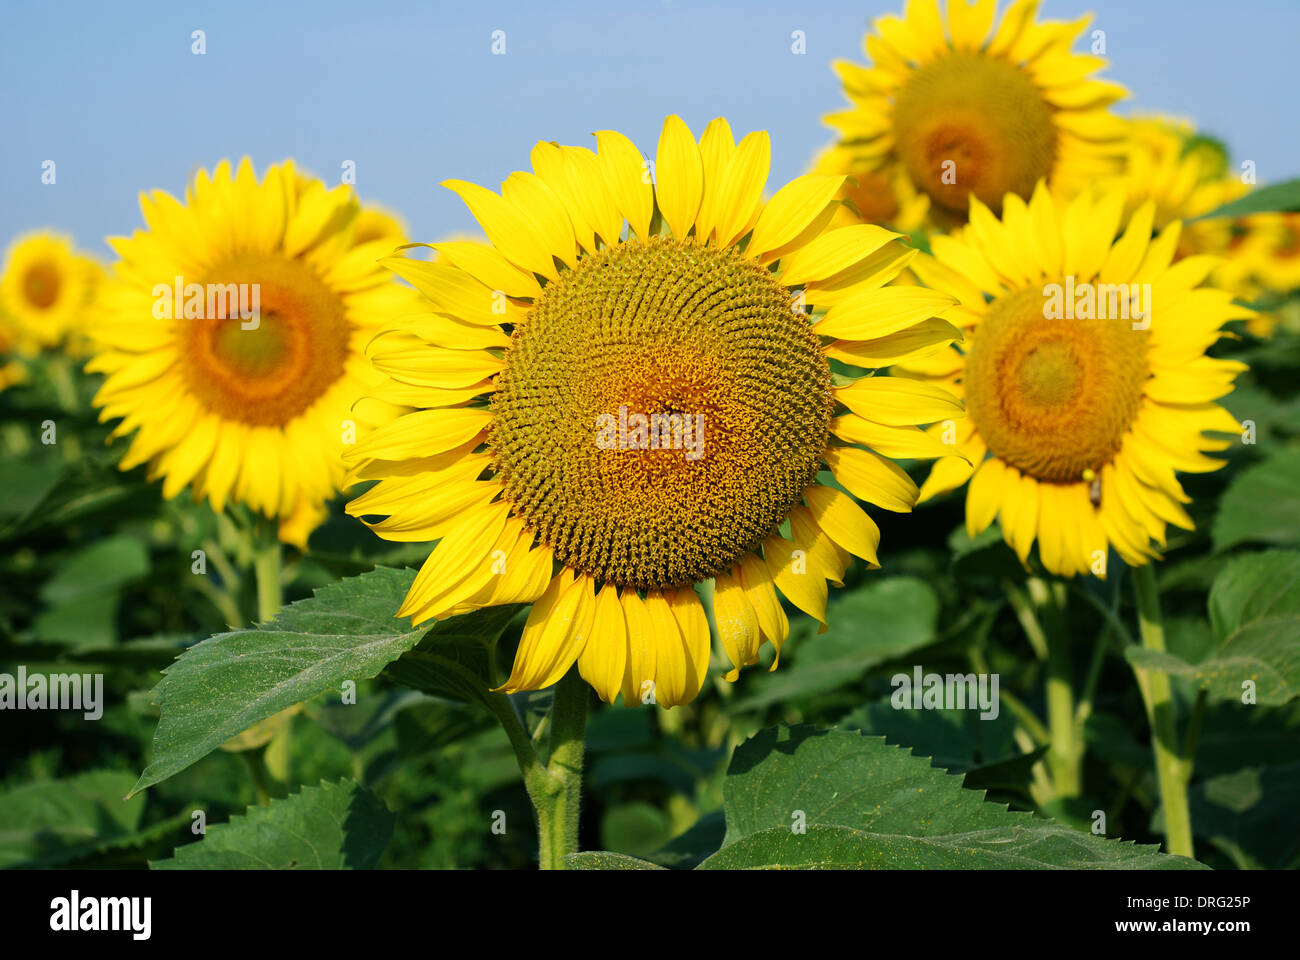 Yellow heads of young sunflowers against sound green stems and leaves Stock Photo